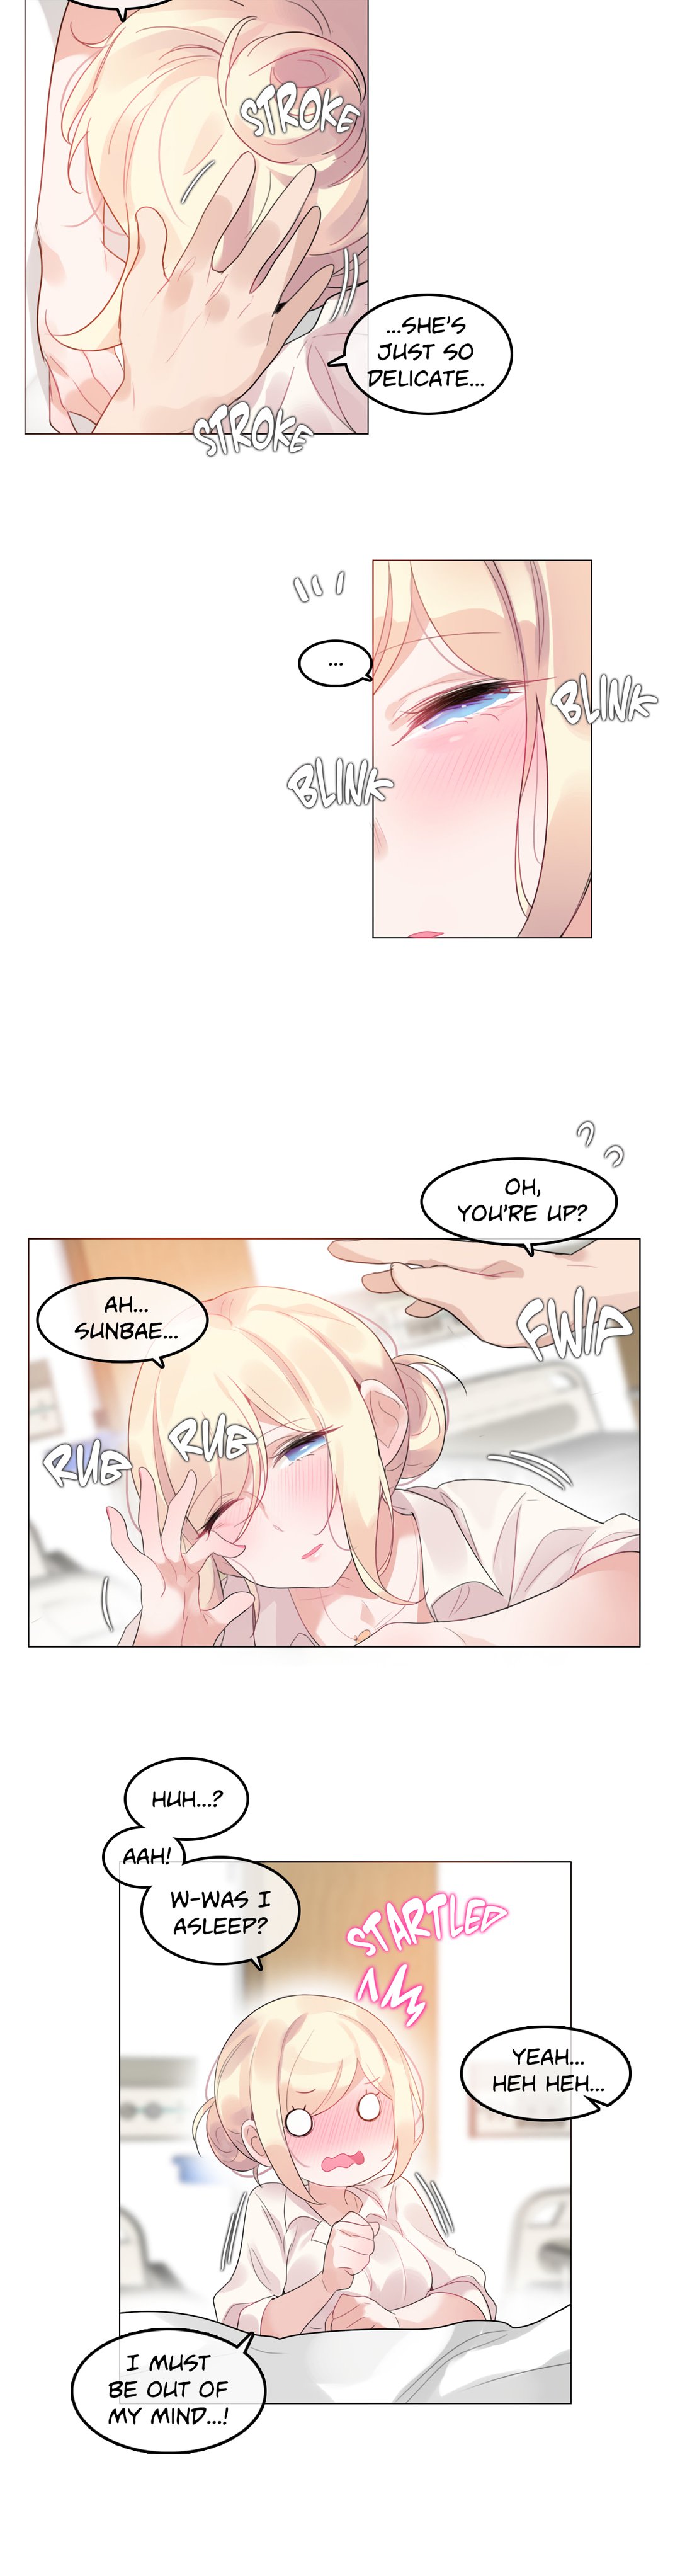 A Pervert's Daily Life - 48 page 12